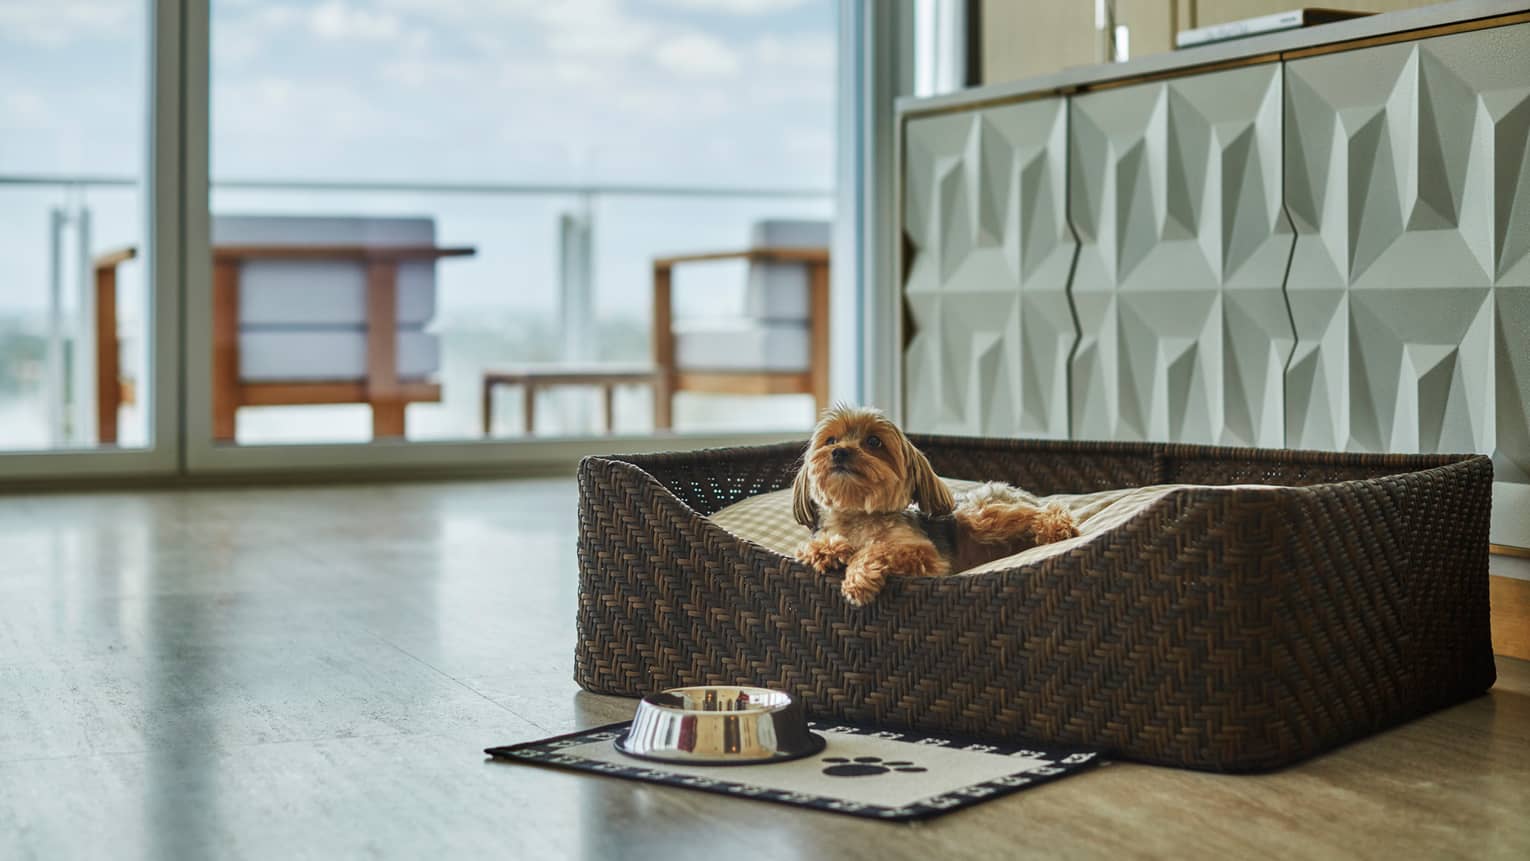 A small dog lounges in basket in front of a mat and bowl by a glass balcony door. Pet amenities are provided for at the private residences at Four Seasons Hotel at the Surf Club, Surfside, luxury vacation rentals in Miami.